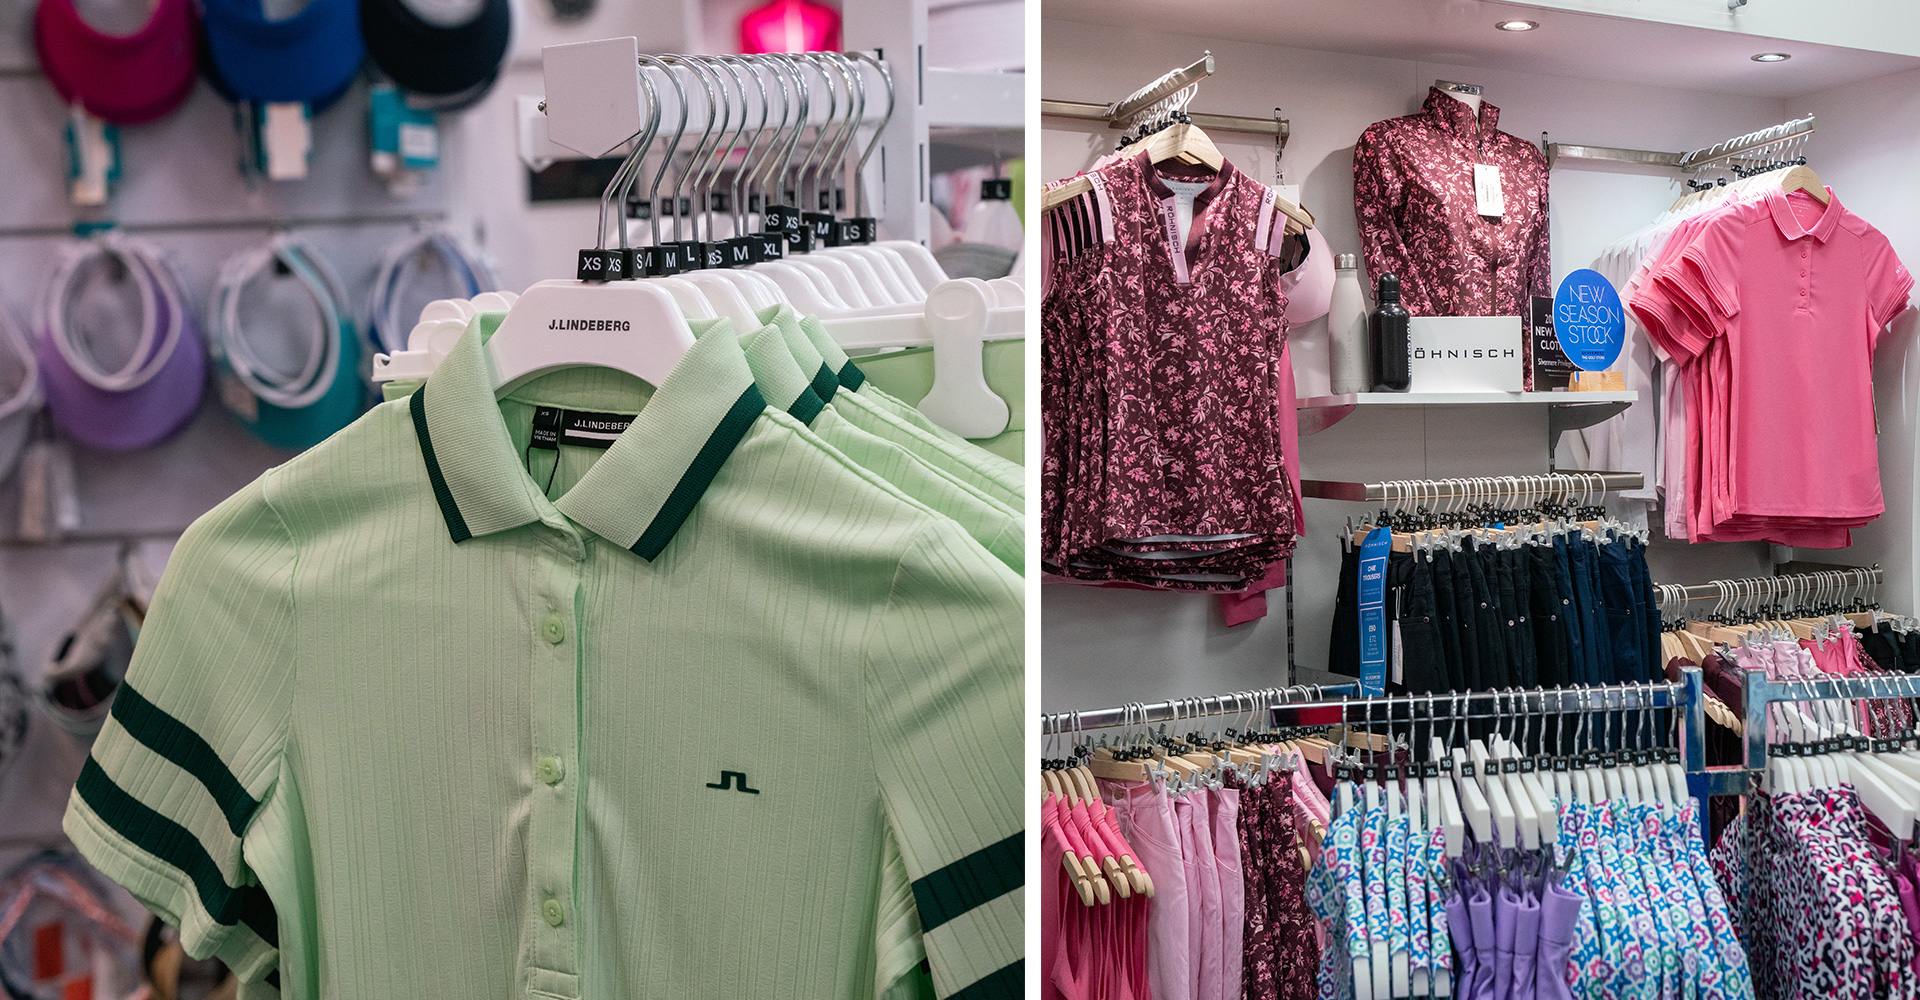 Silvermere's Ladies Golf Store